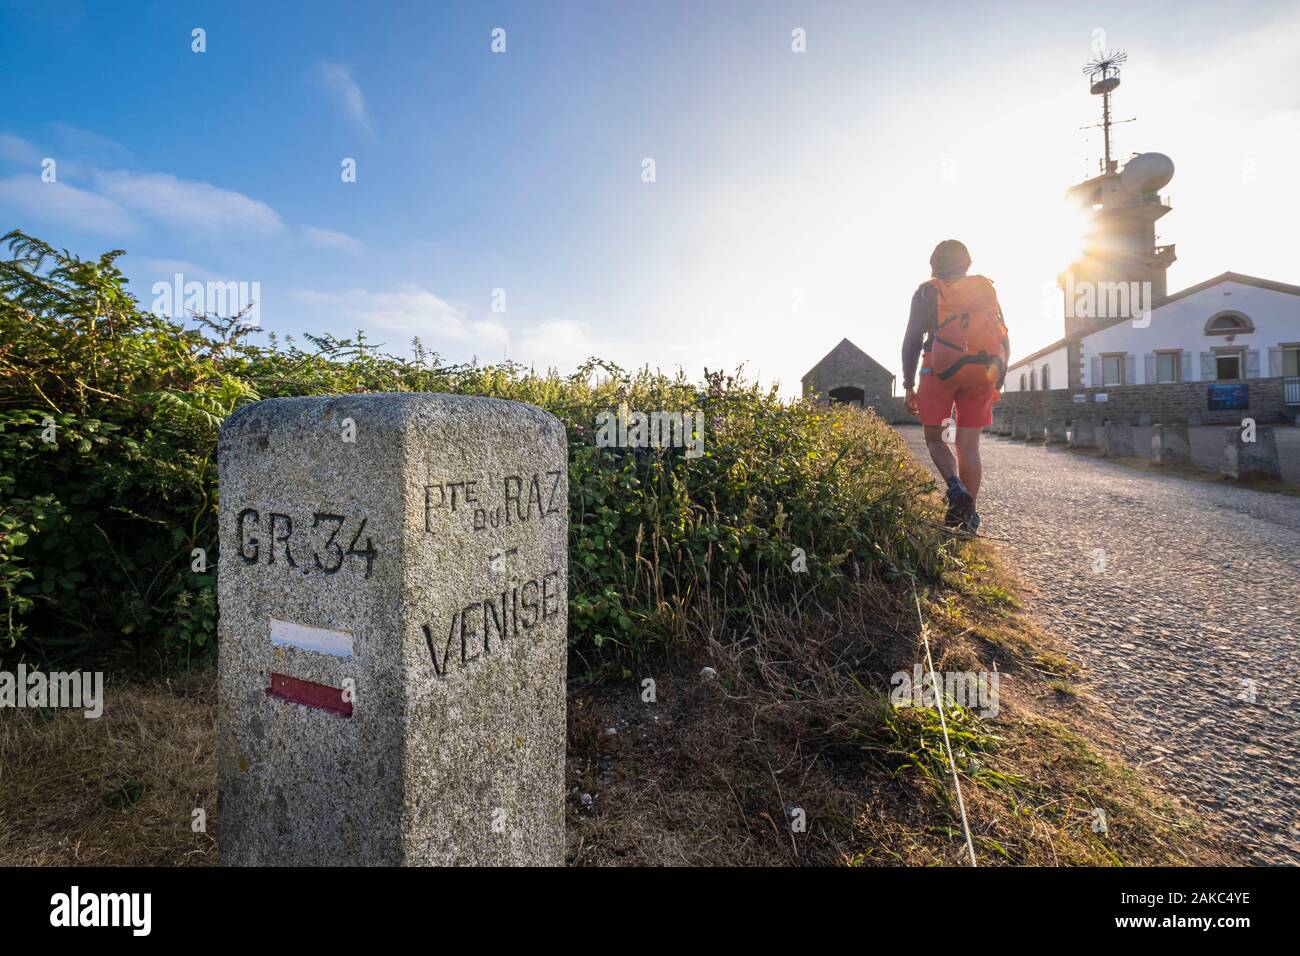 France, Finistere, Plogoff, Pointe du Raz, signposting of GR 34 hiking trail or customs trail and E5 European long distance path from Pointe du Raz to Venice Stock Photo